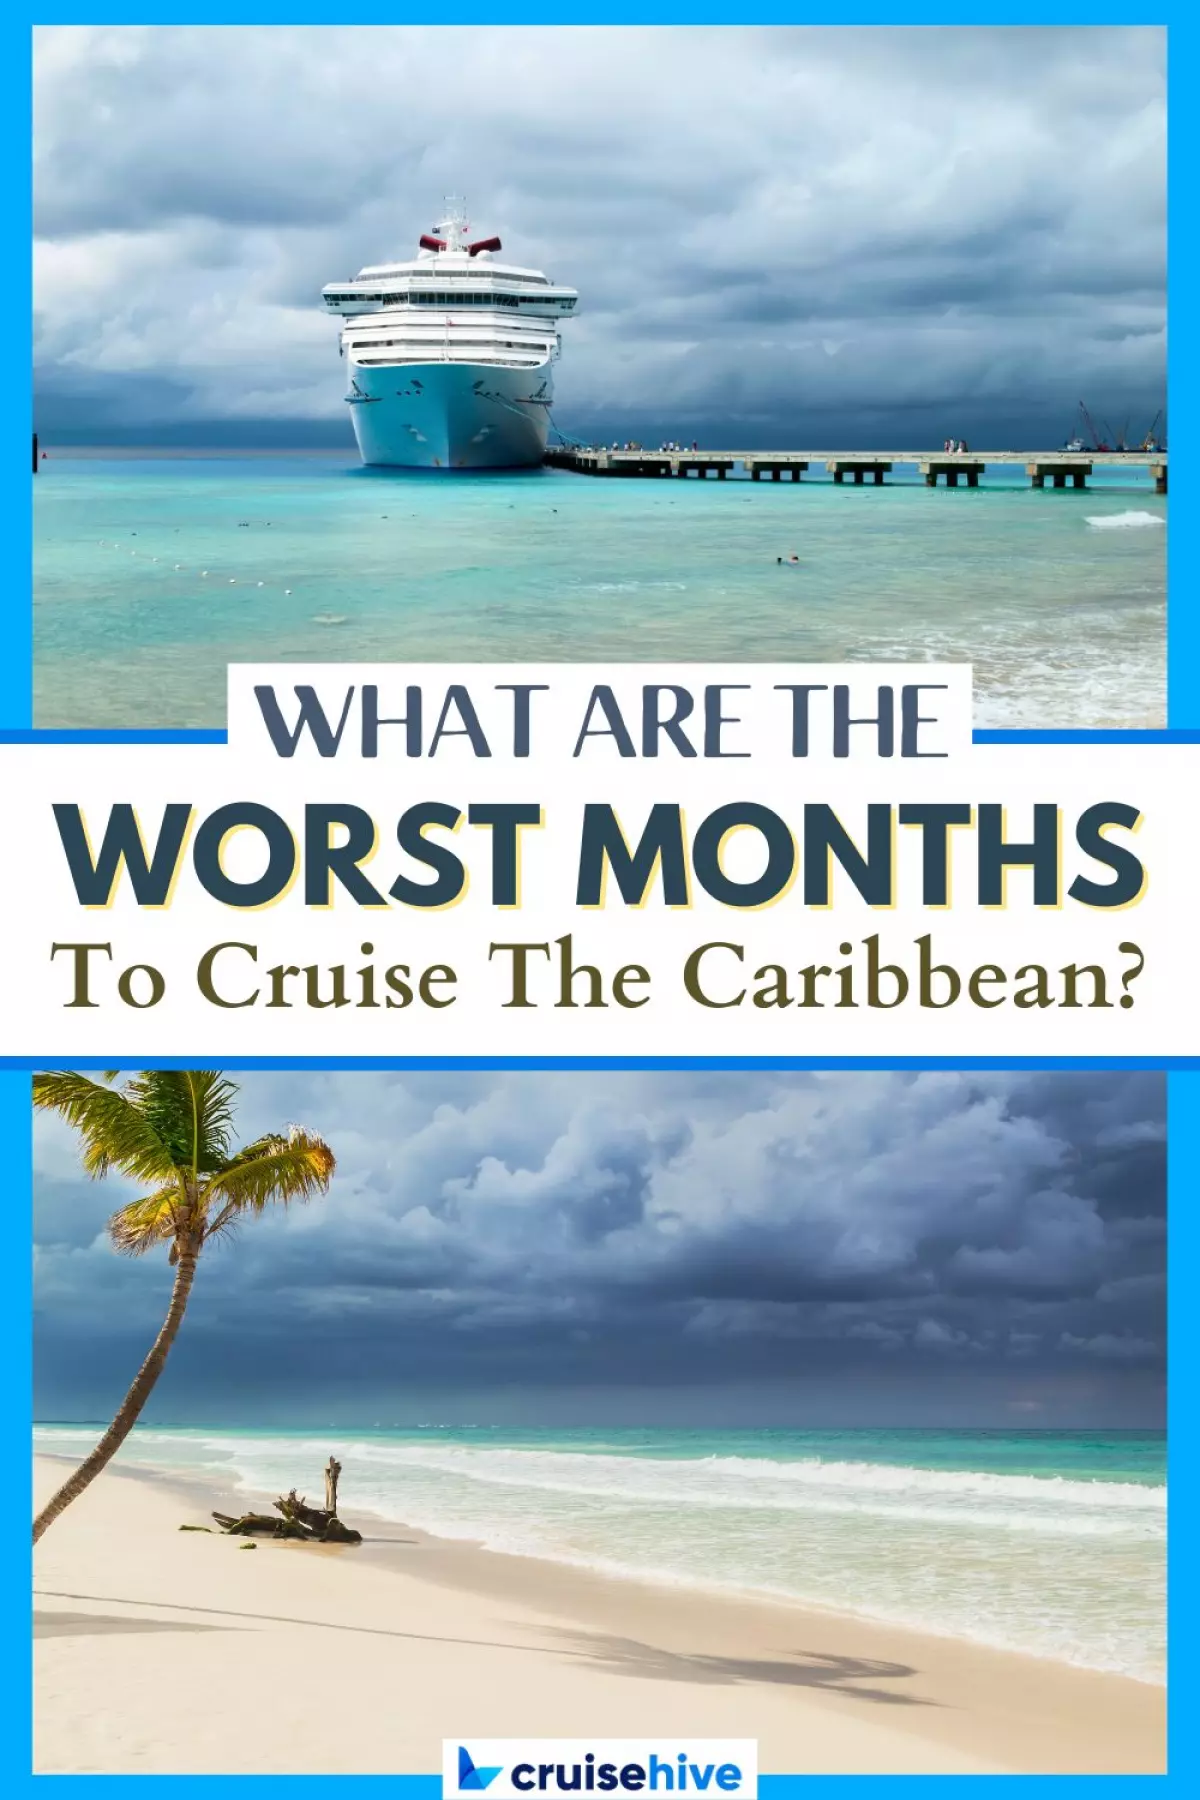 Worst Months to Cruise the Caribbean